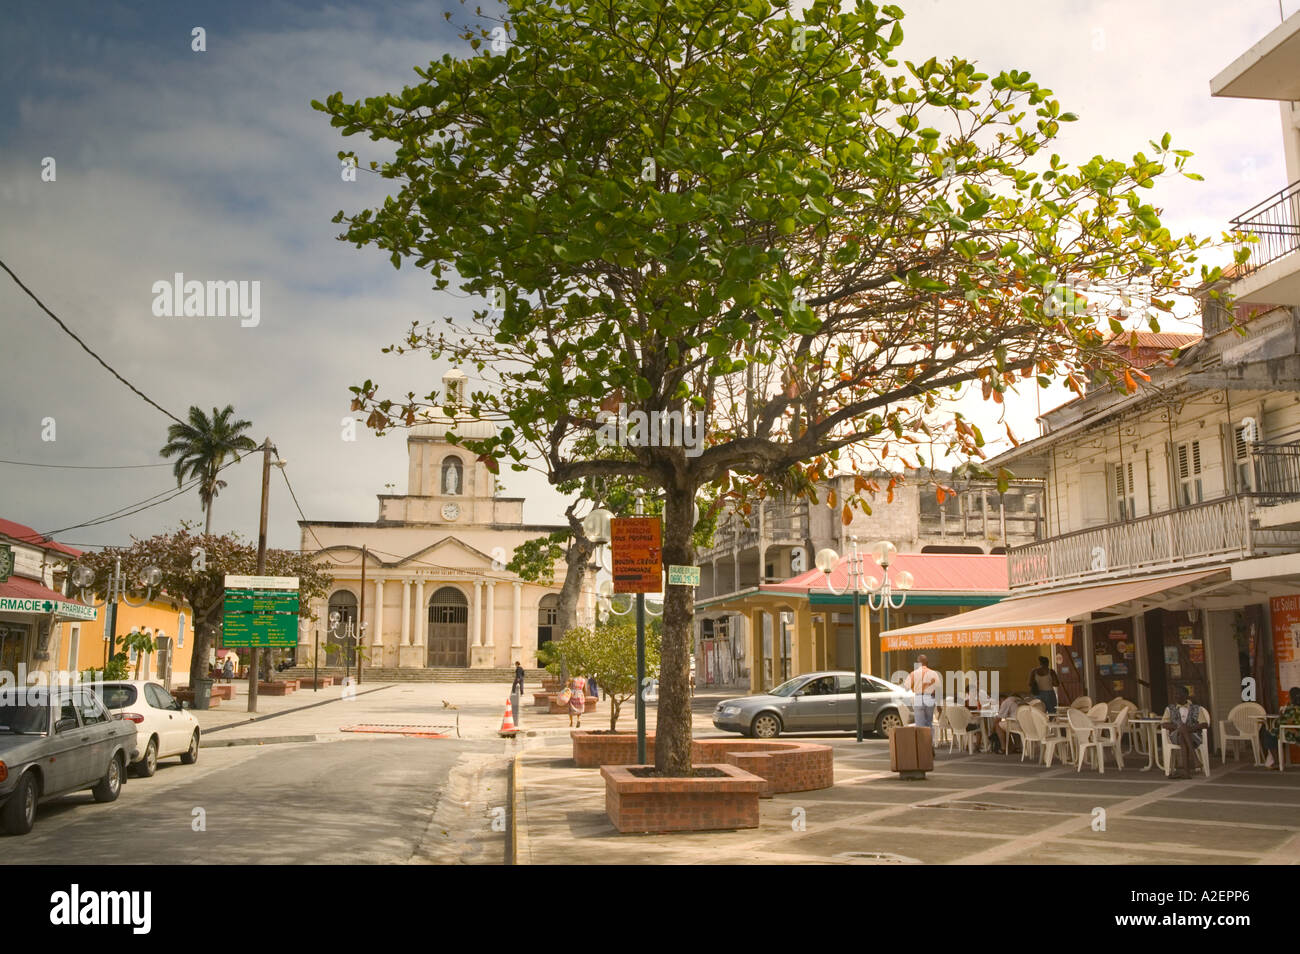 French West Indies, Guadalupa, Marie Galante, Isola, GRAND, BOURG: Place de l'Eglise, Cafe & chiesa del paese Foto Stock